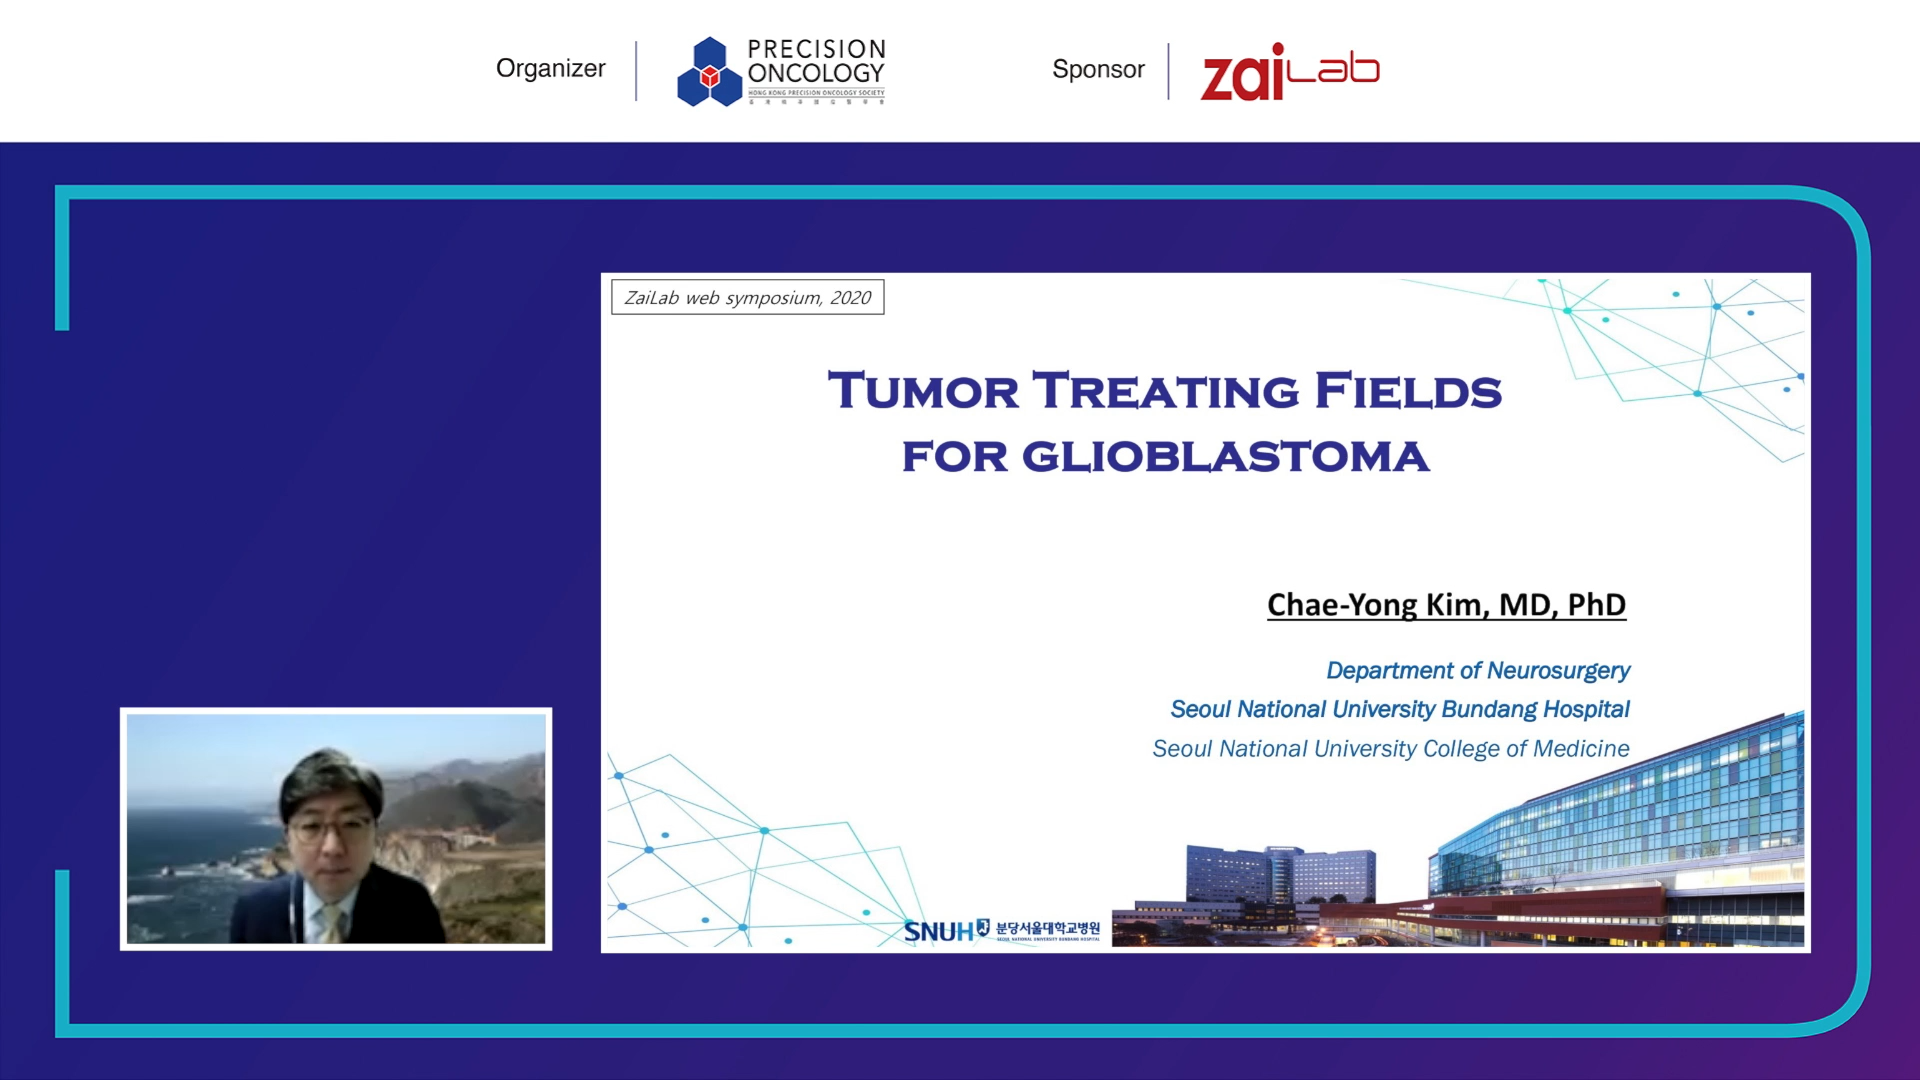 [Lecture video] Tumor treating fields for glioblastoma – Prof. Chae-Yong Kim, South Korea (03 Sep 2020)